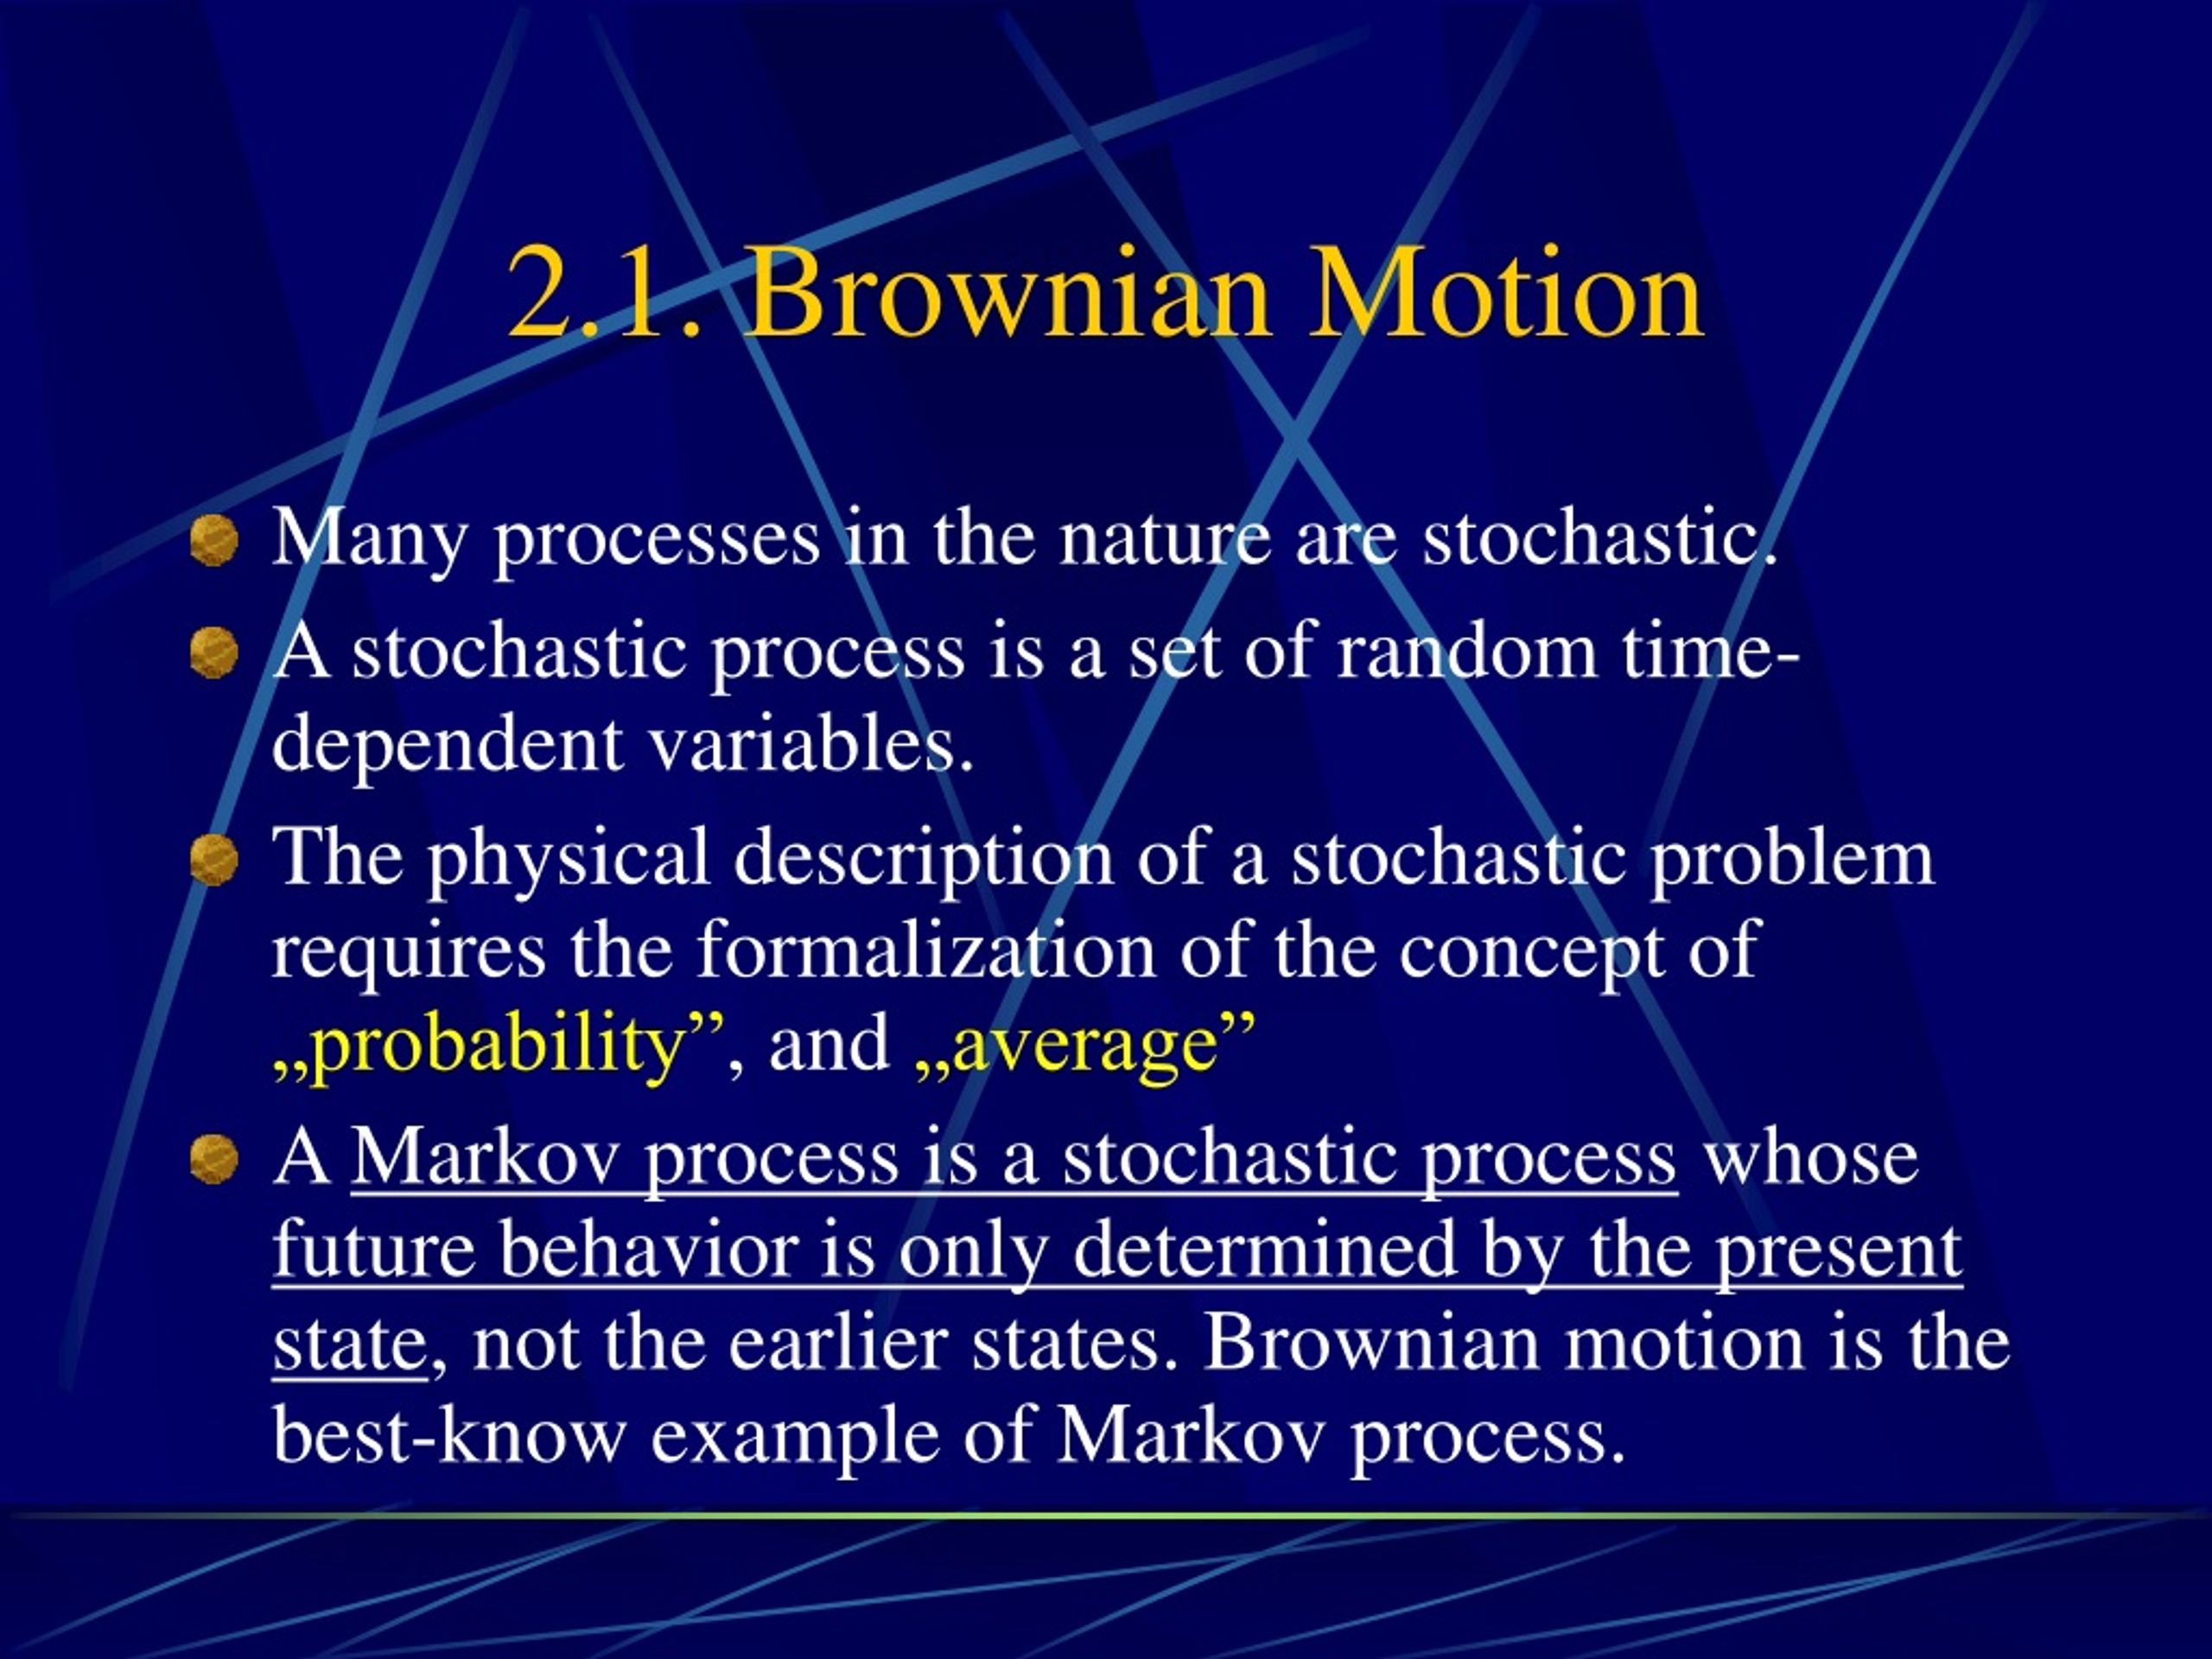 brownian motion examples